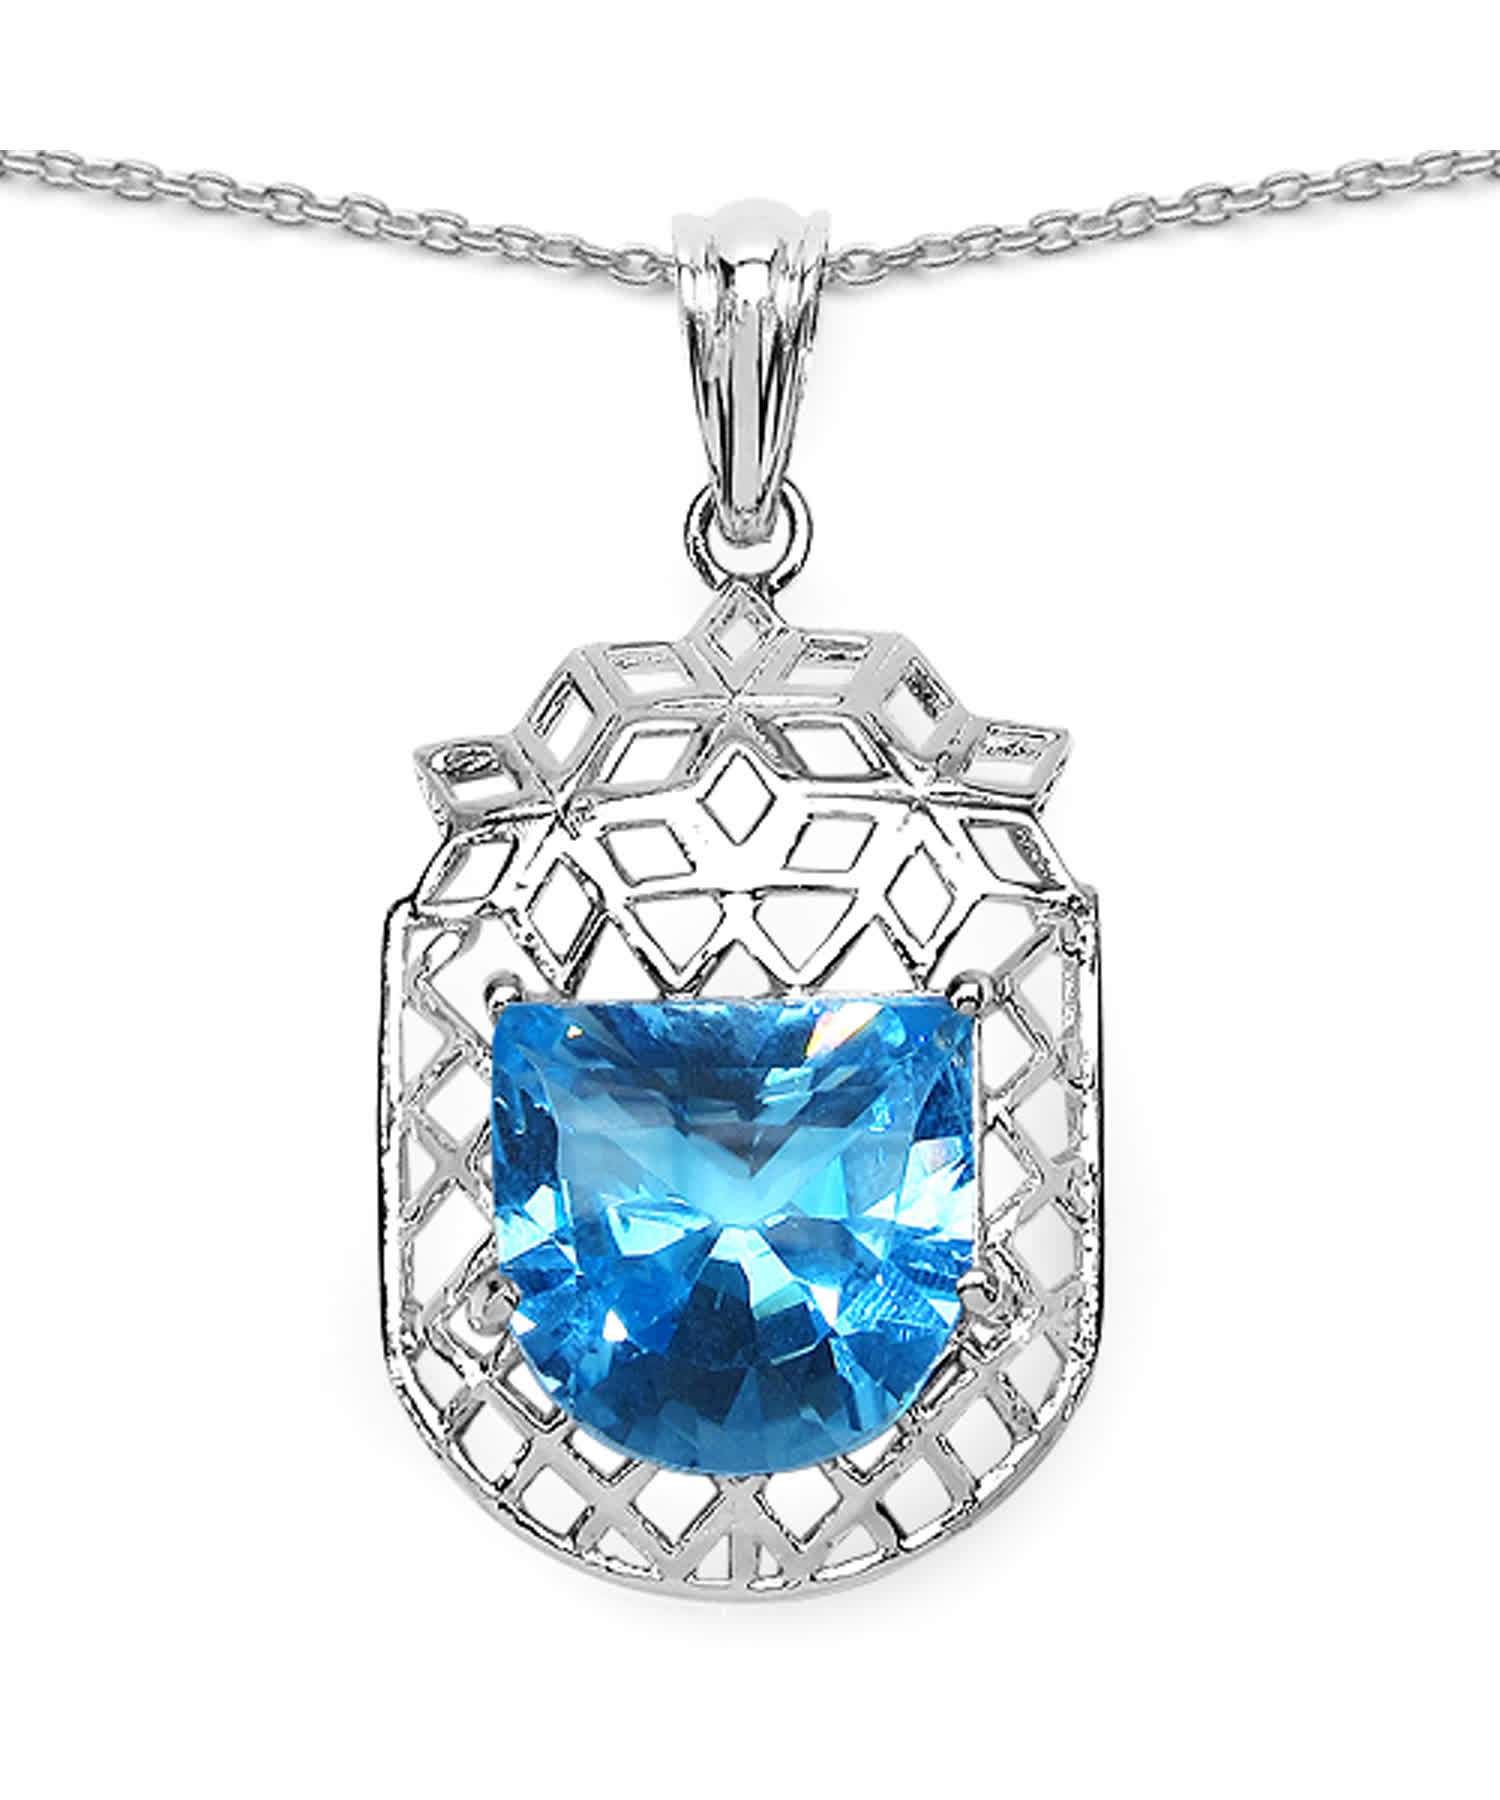 10.90ctw Natural Swiss Blue Topaz Rhodium Plated 925 Sterling Silver Pendant With Chain View 1